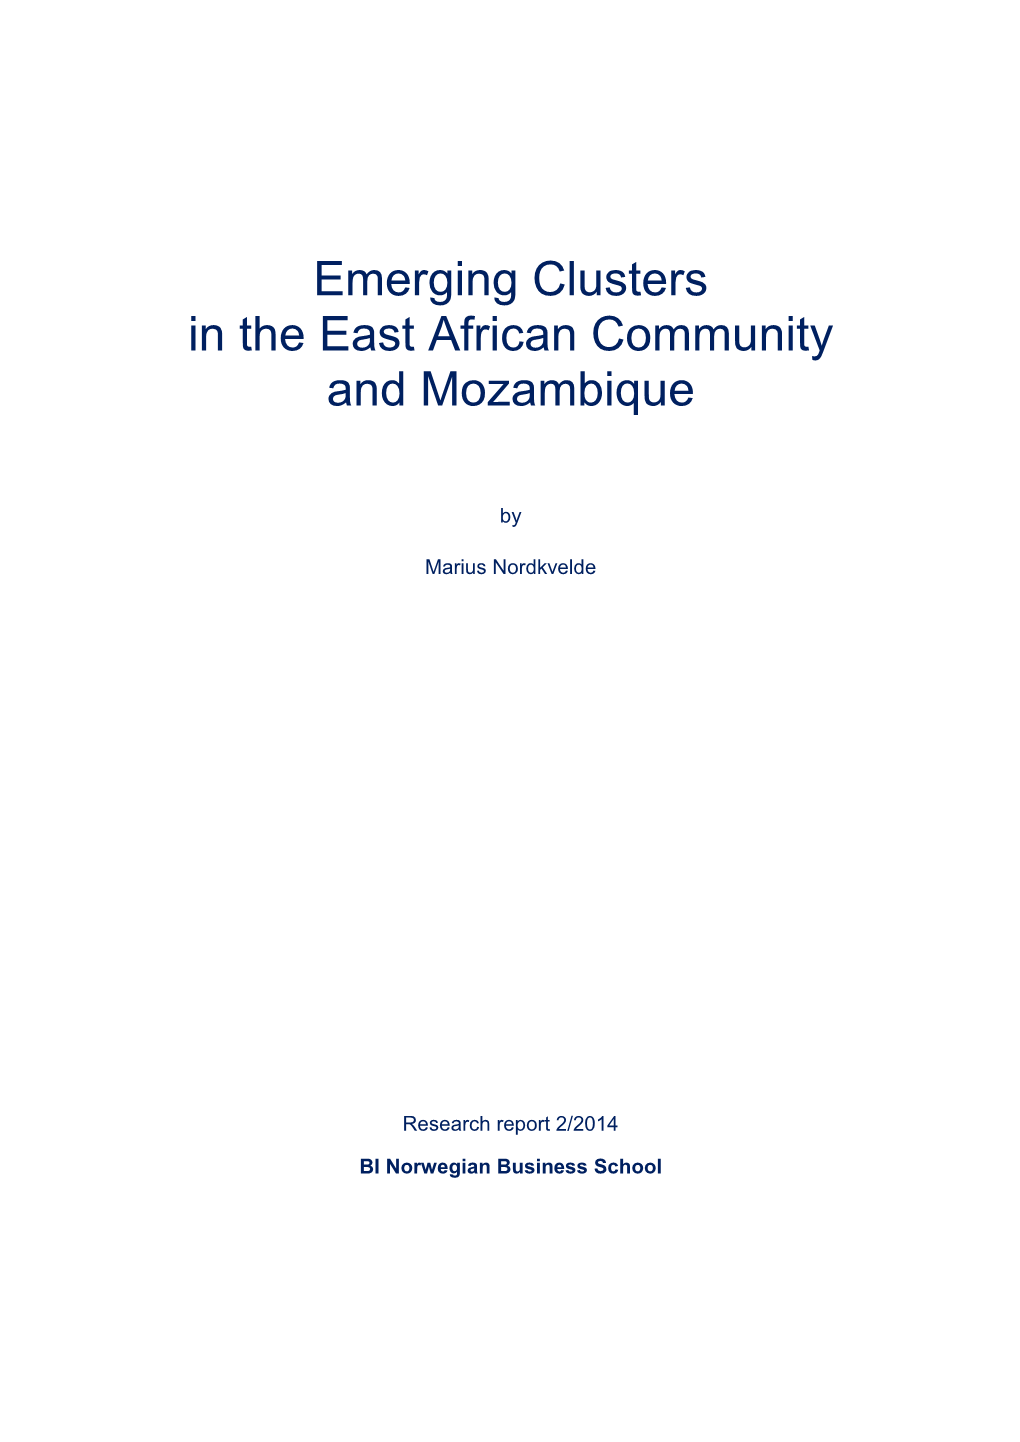 Emerging Clusters in the East African Community and Mozambique